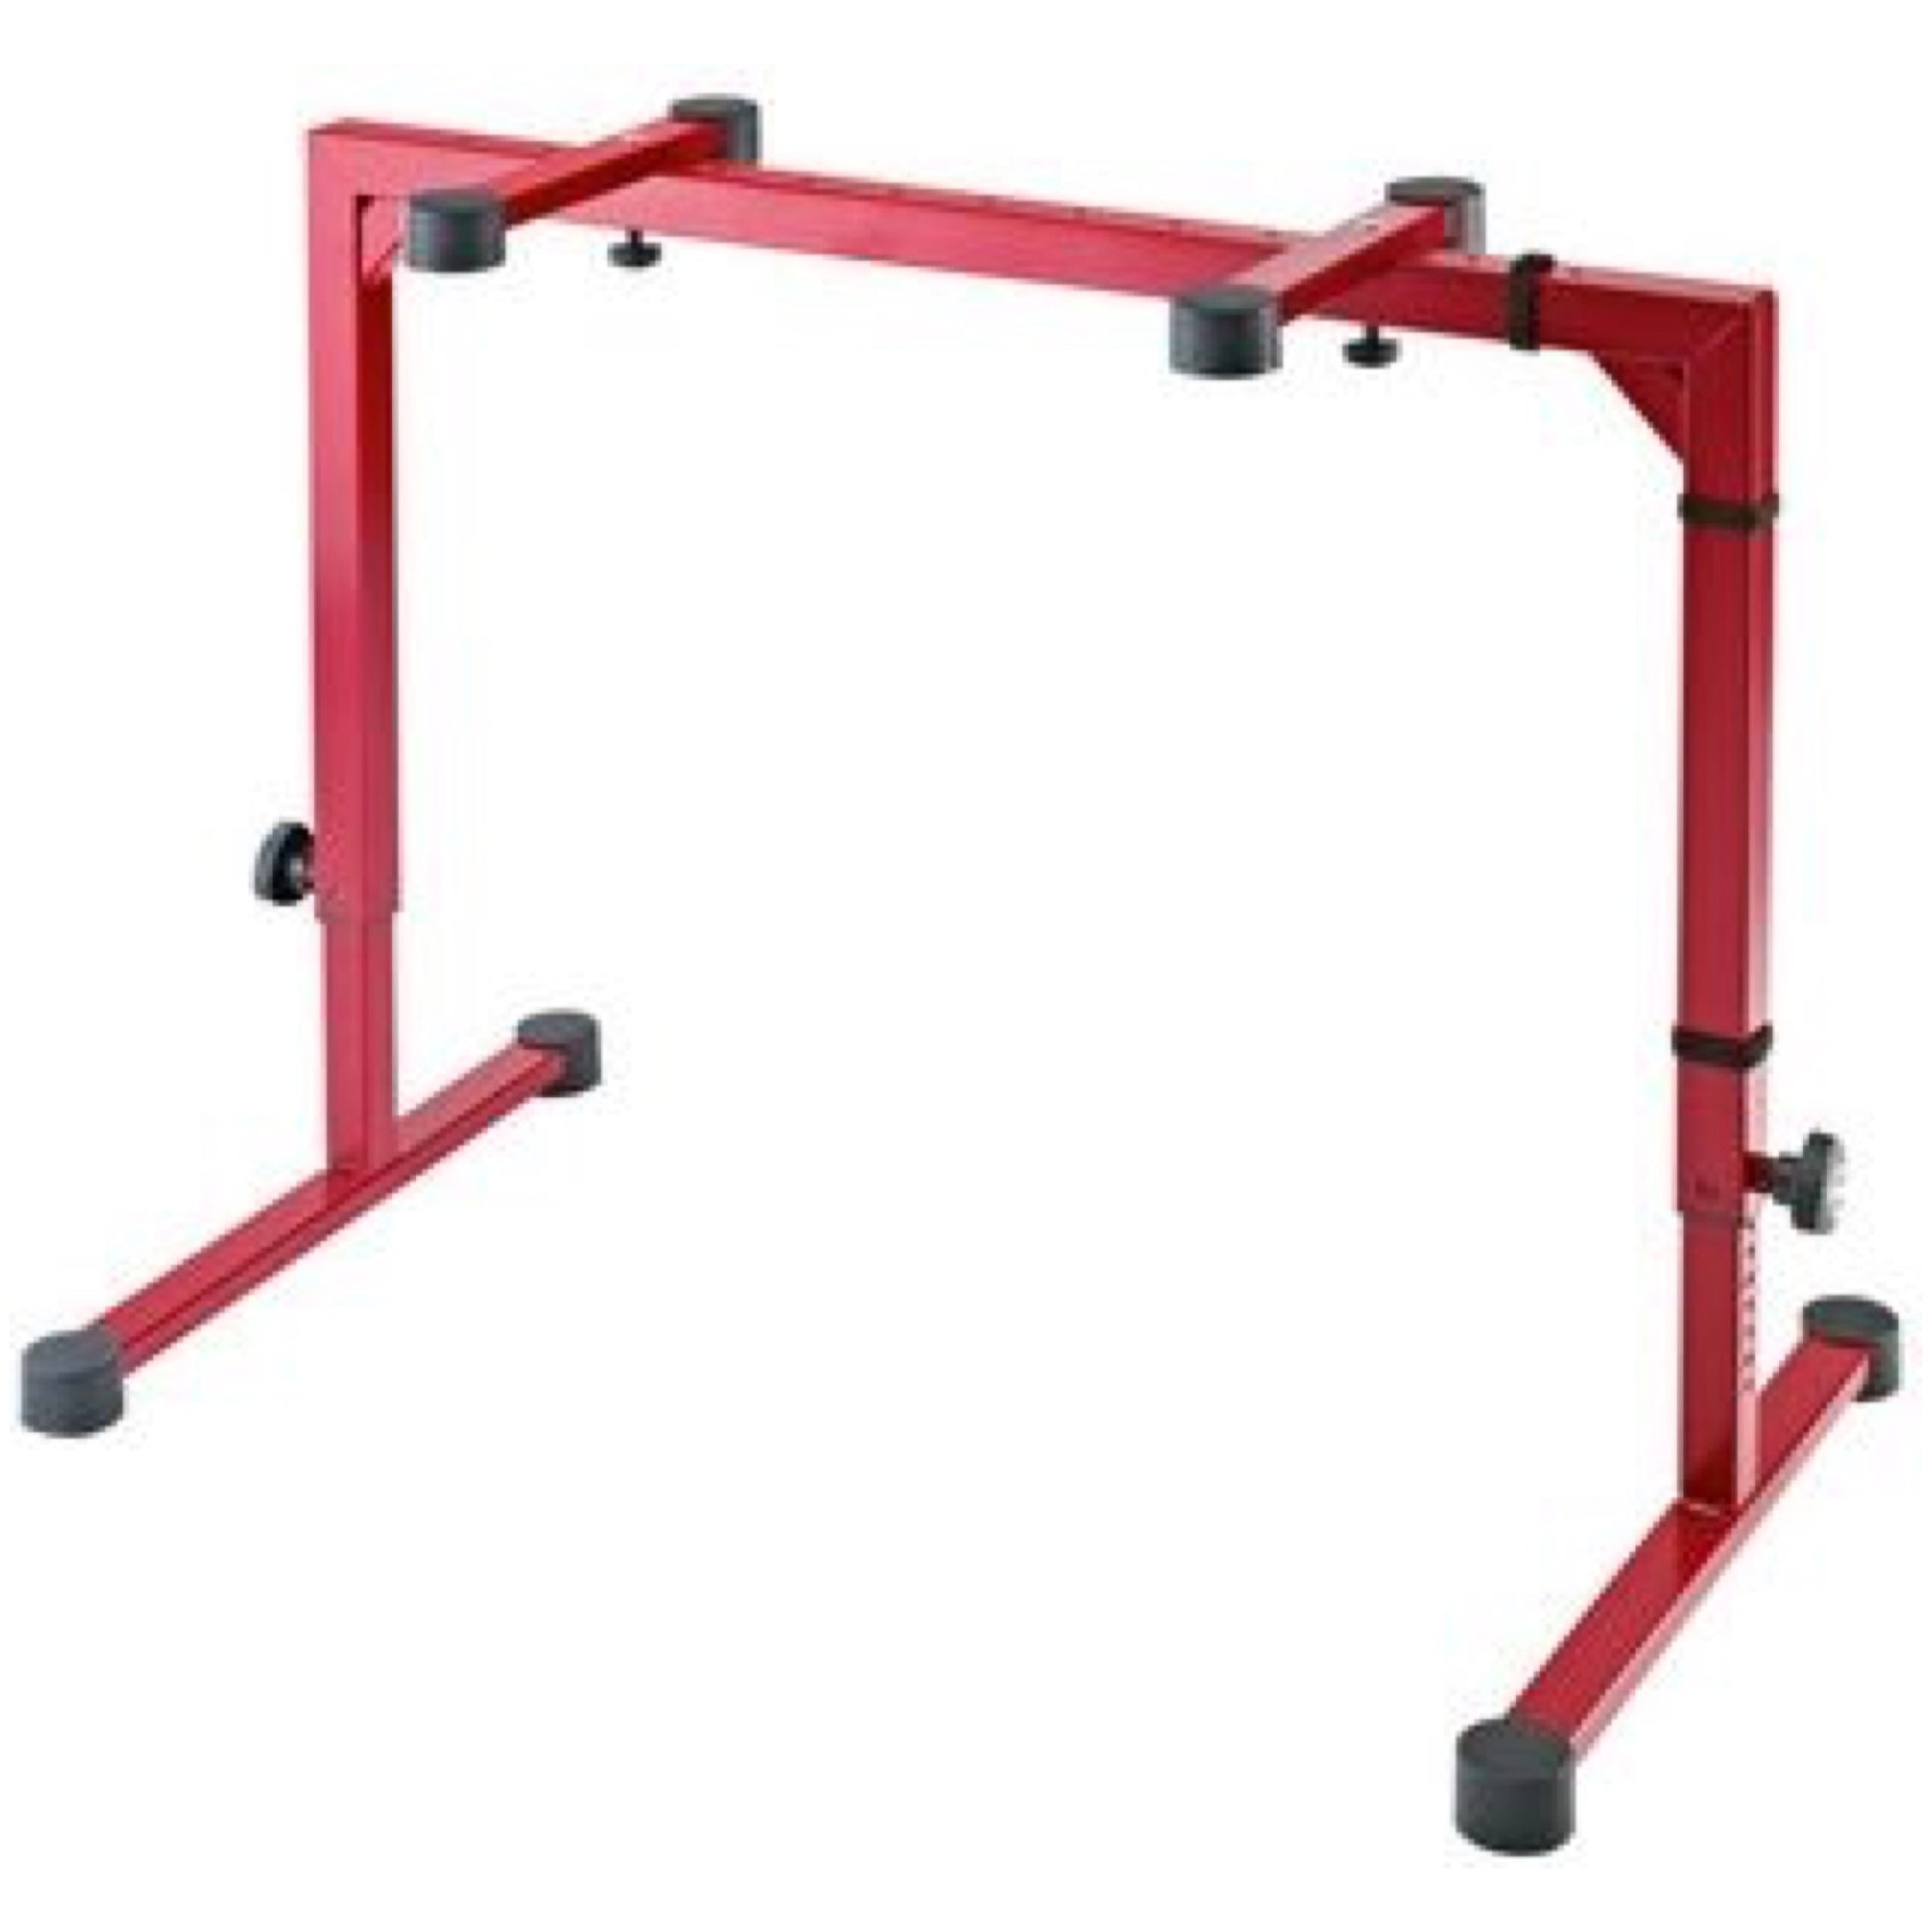 K&M Omega Table-Style Keyboard Stand, Red